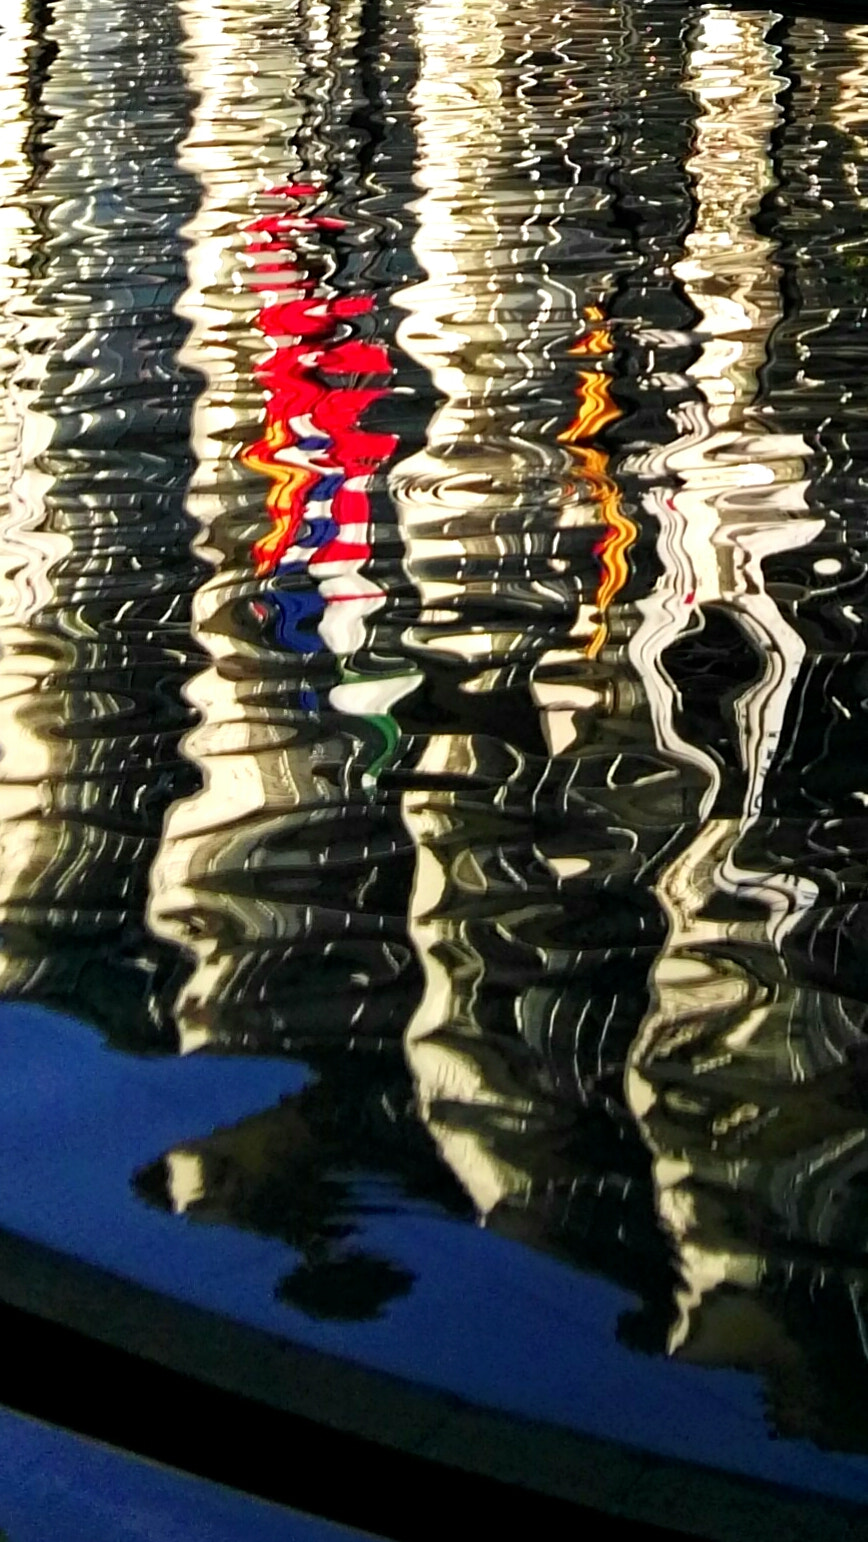 HUAWEI G8 sample photo. Flags in water photography